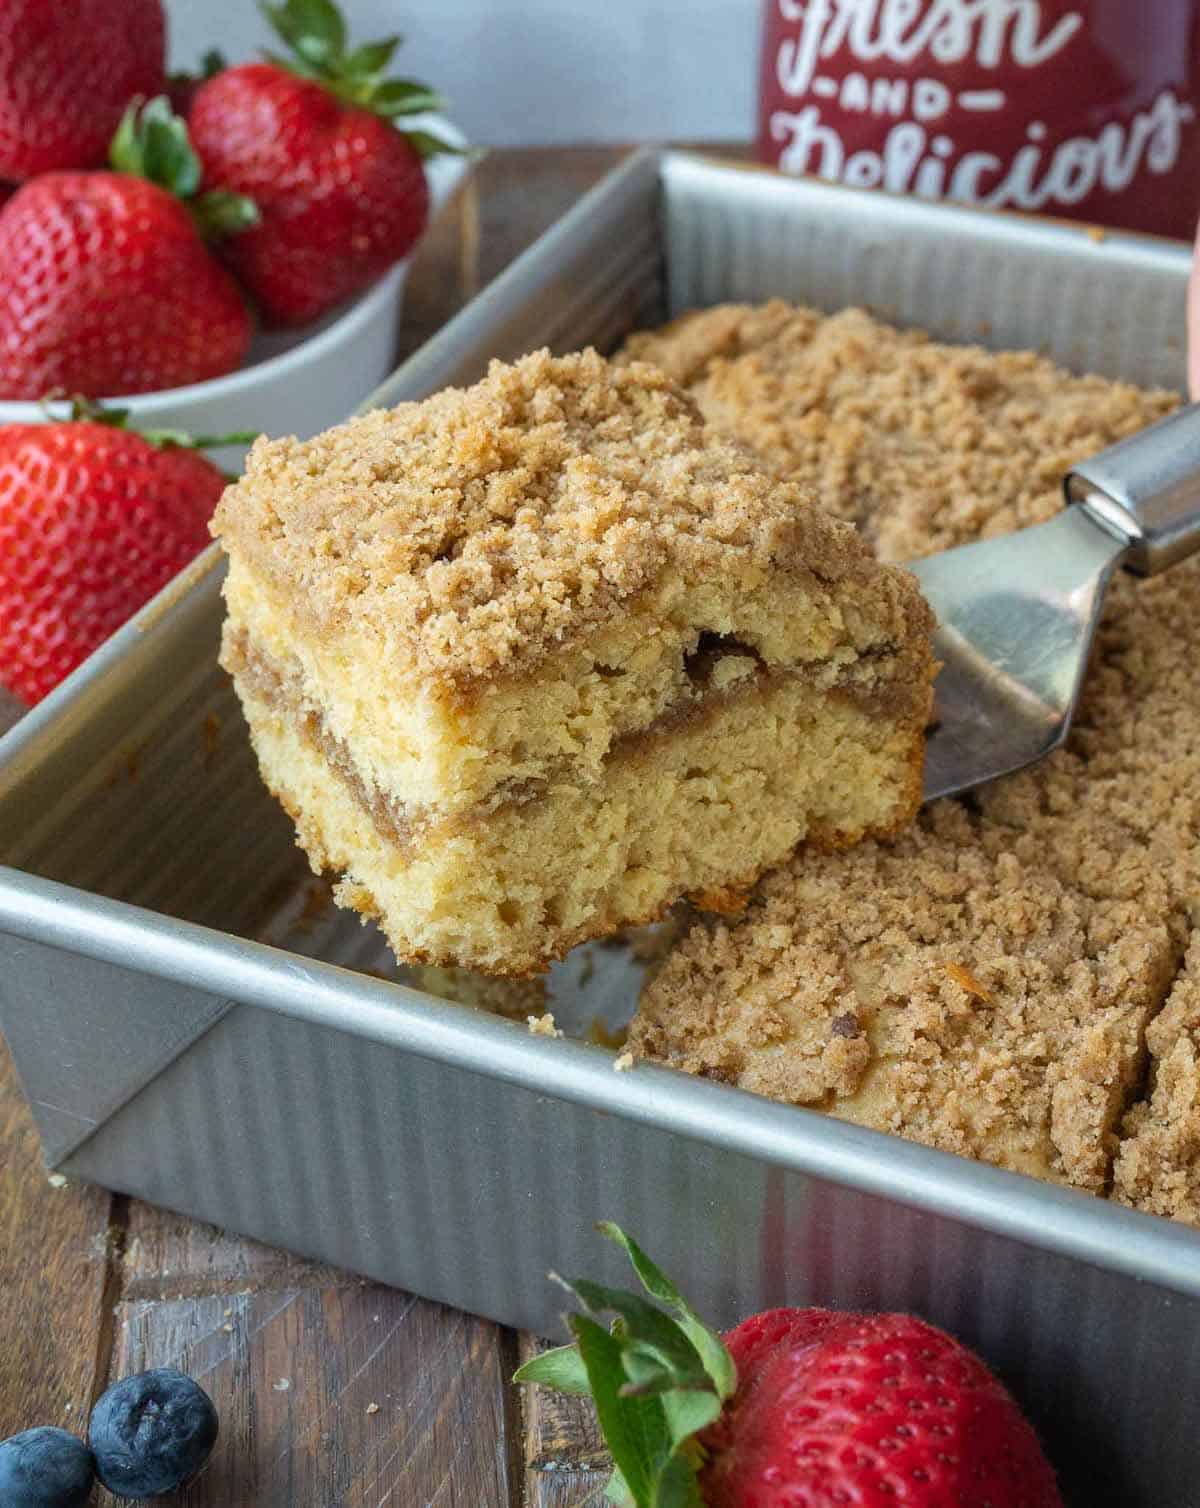 A spatula picking up a slice of sour cream crumb cake.